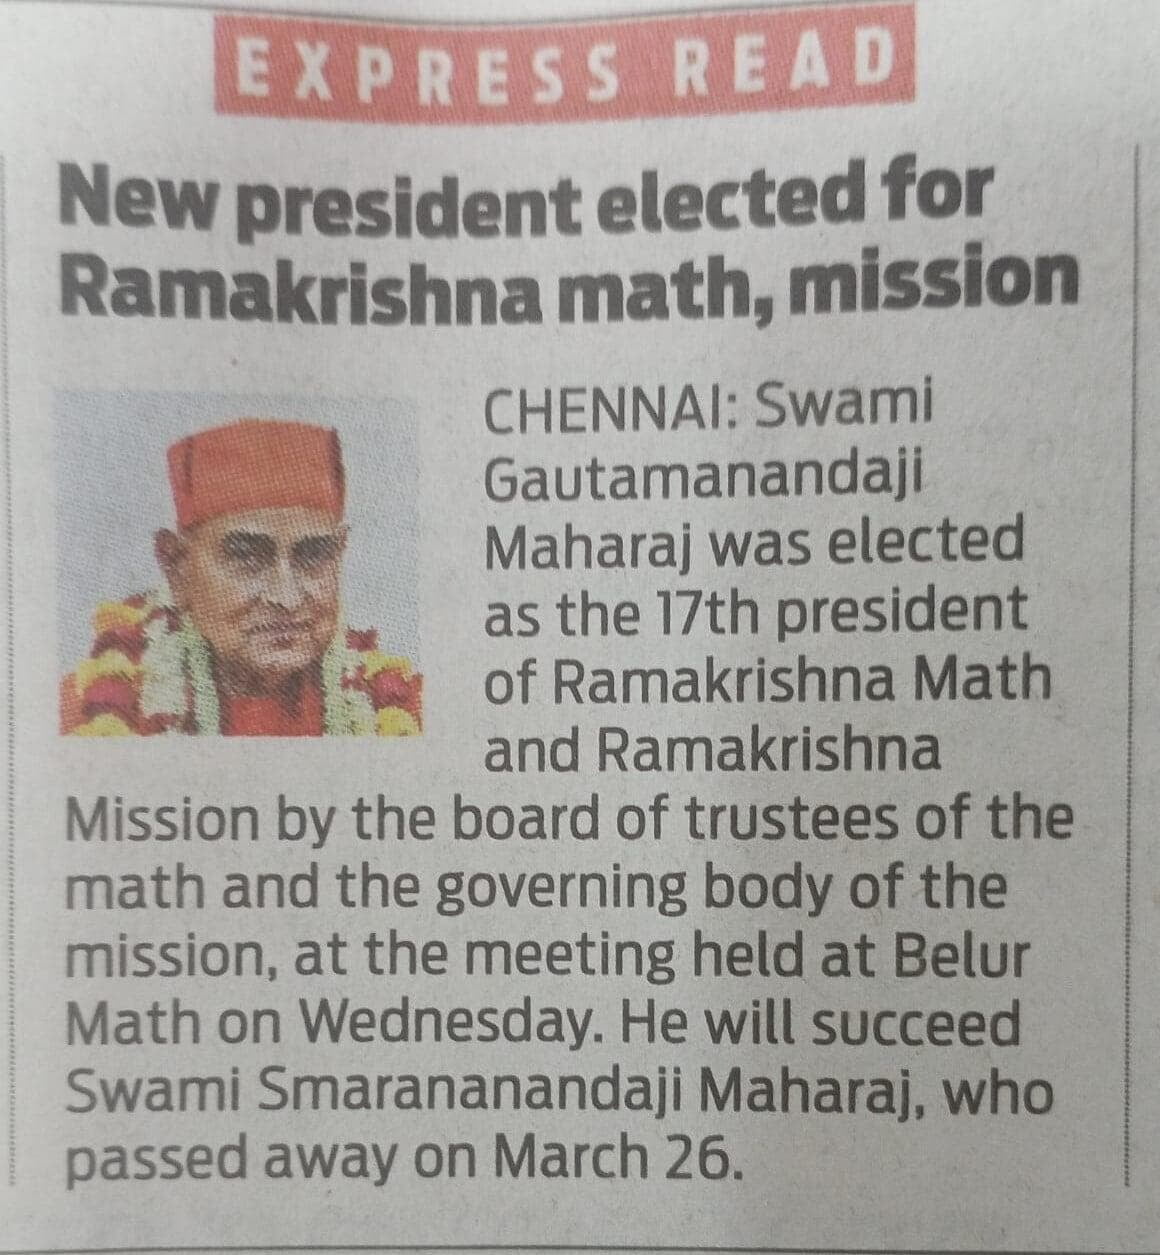 New President Elected for Ramakrishna Math & Mission - Indian Express News Report